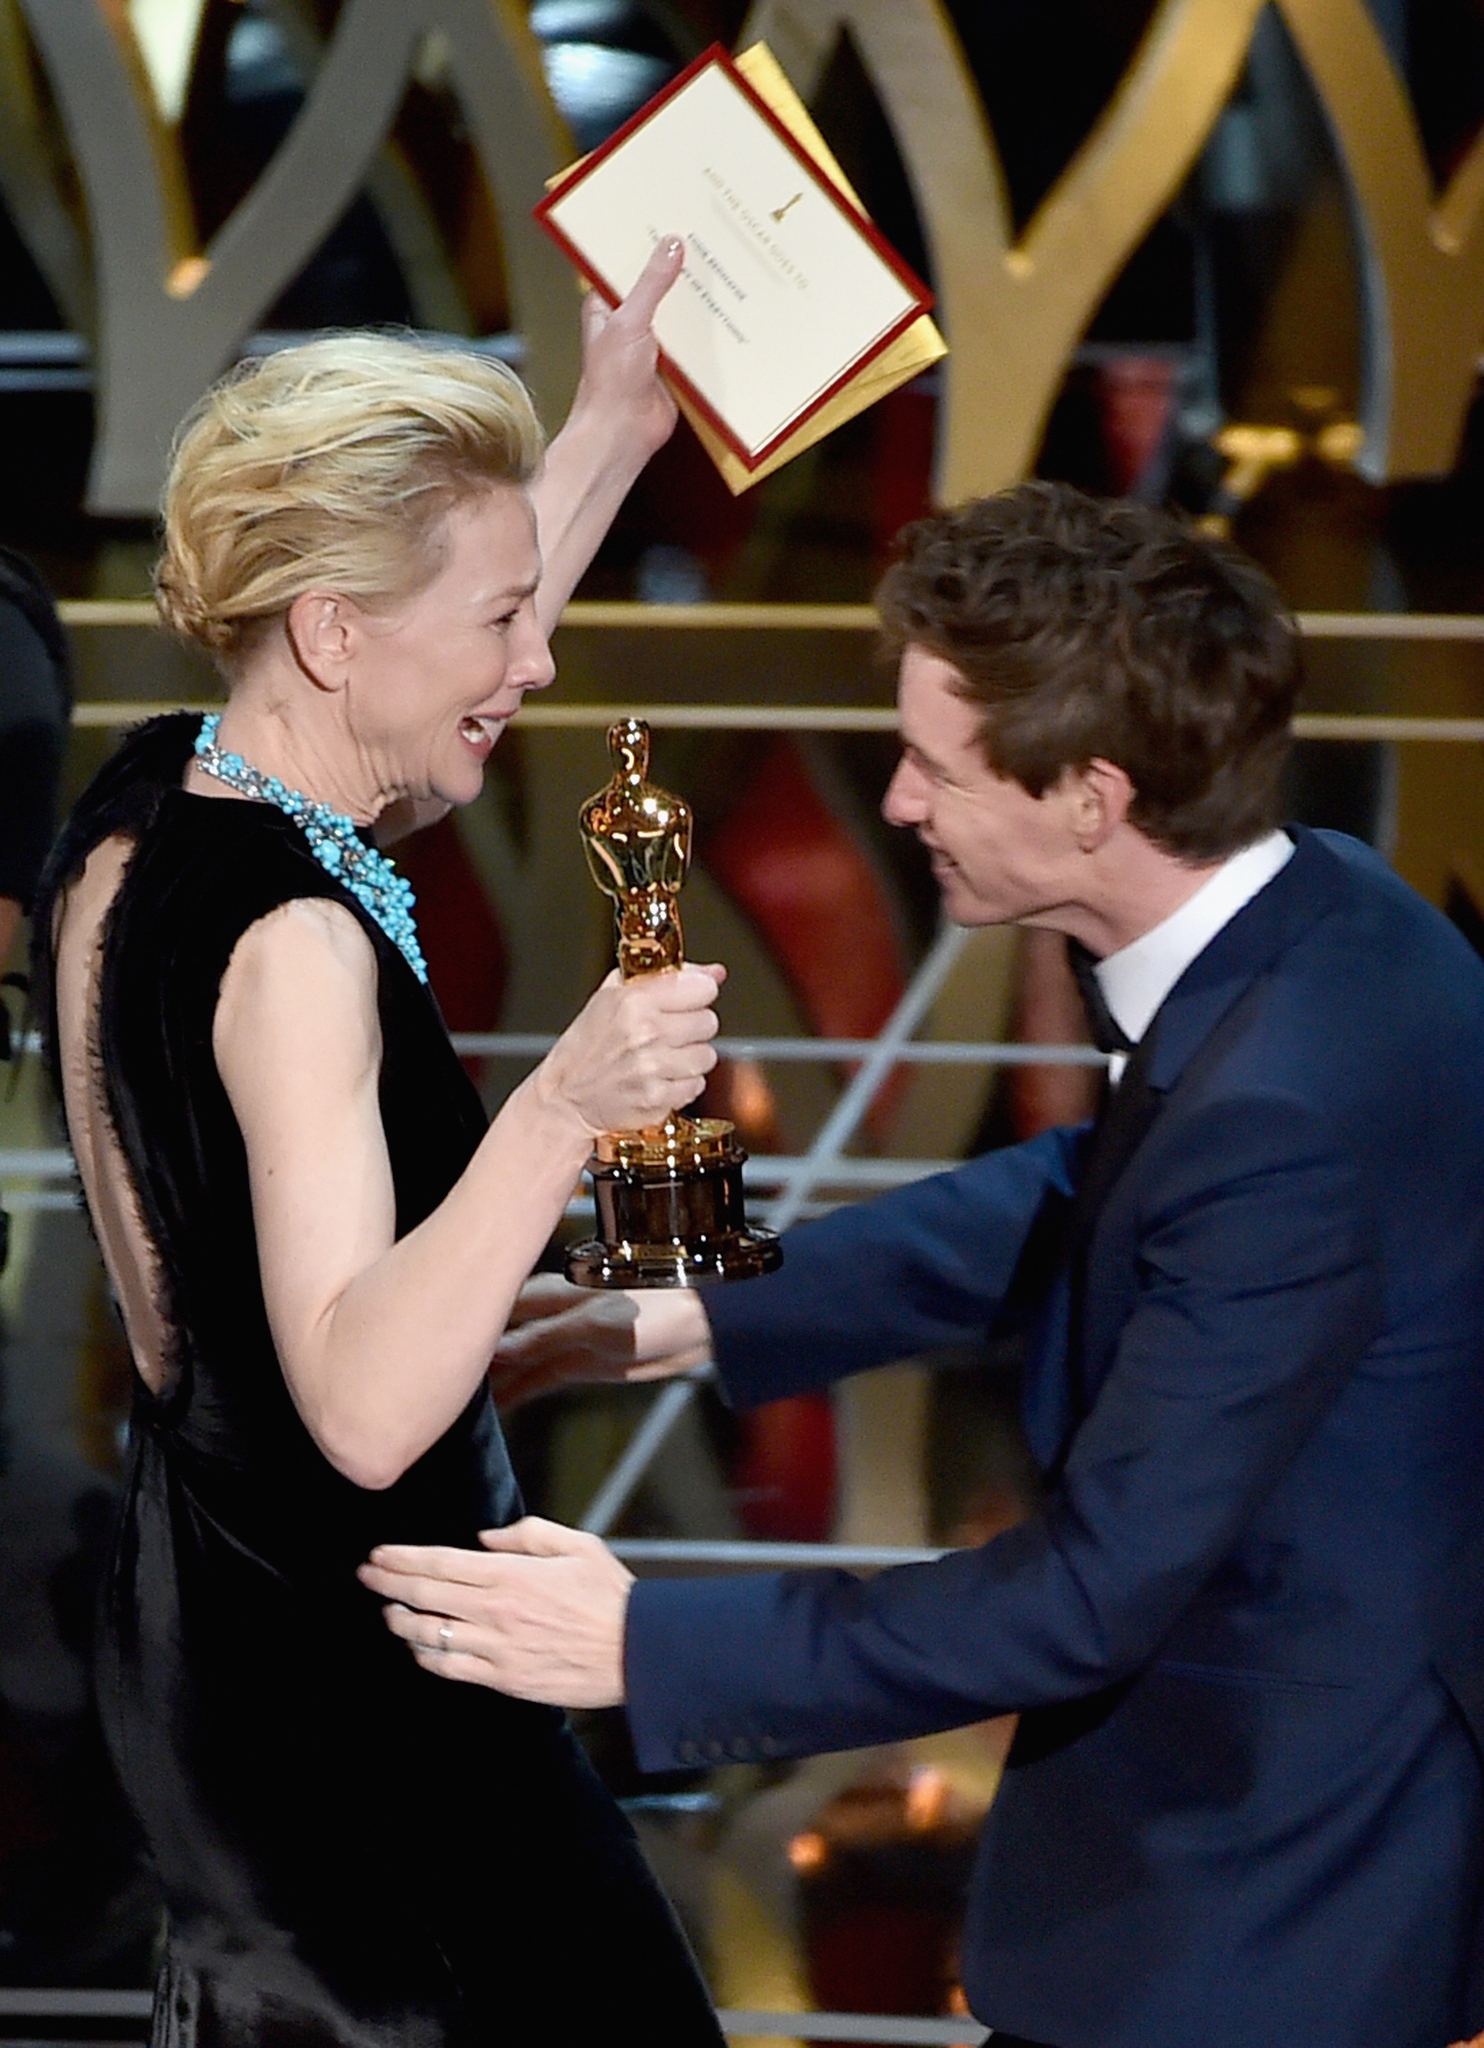 Cate Blanchett and Eddie Redmayne at event of The Oscars (2015)